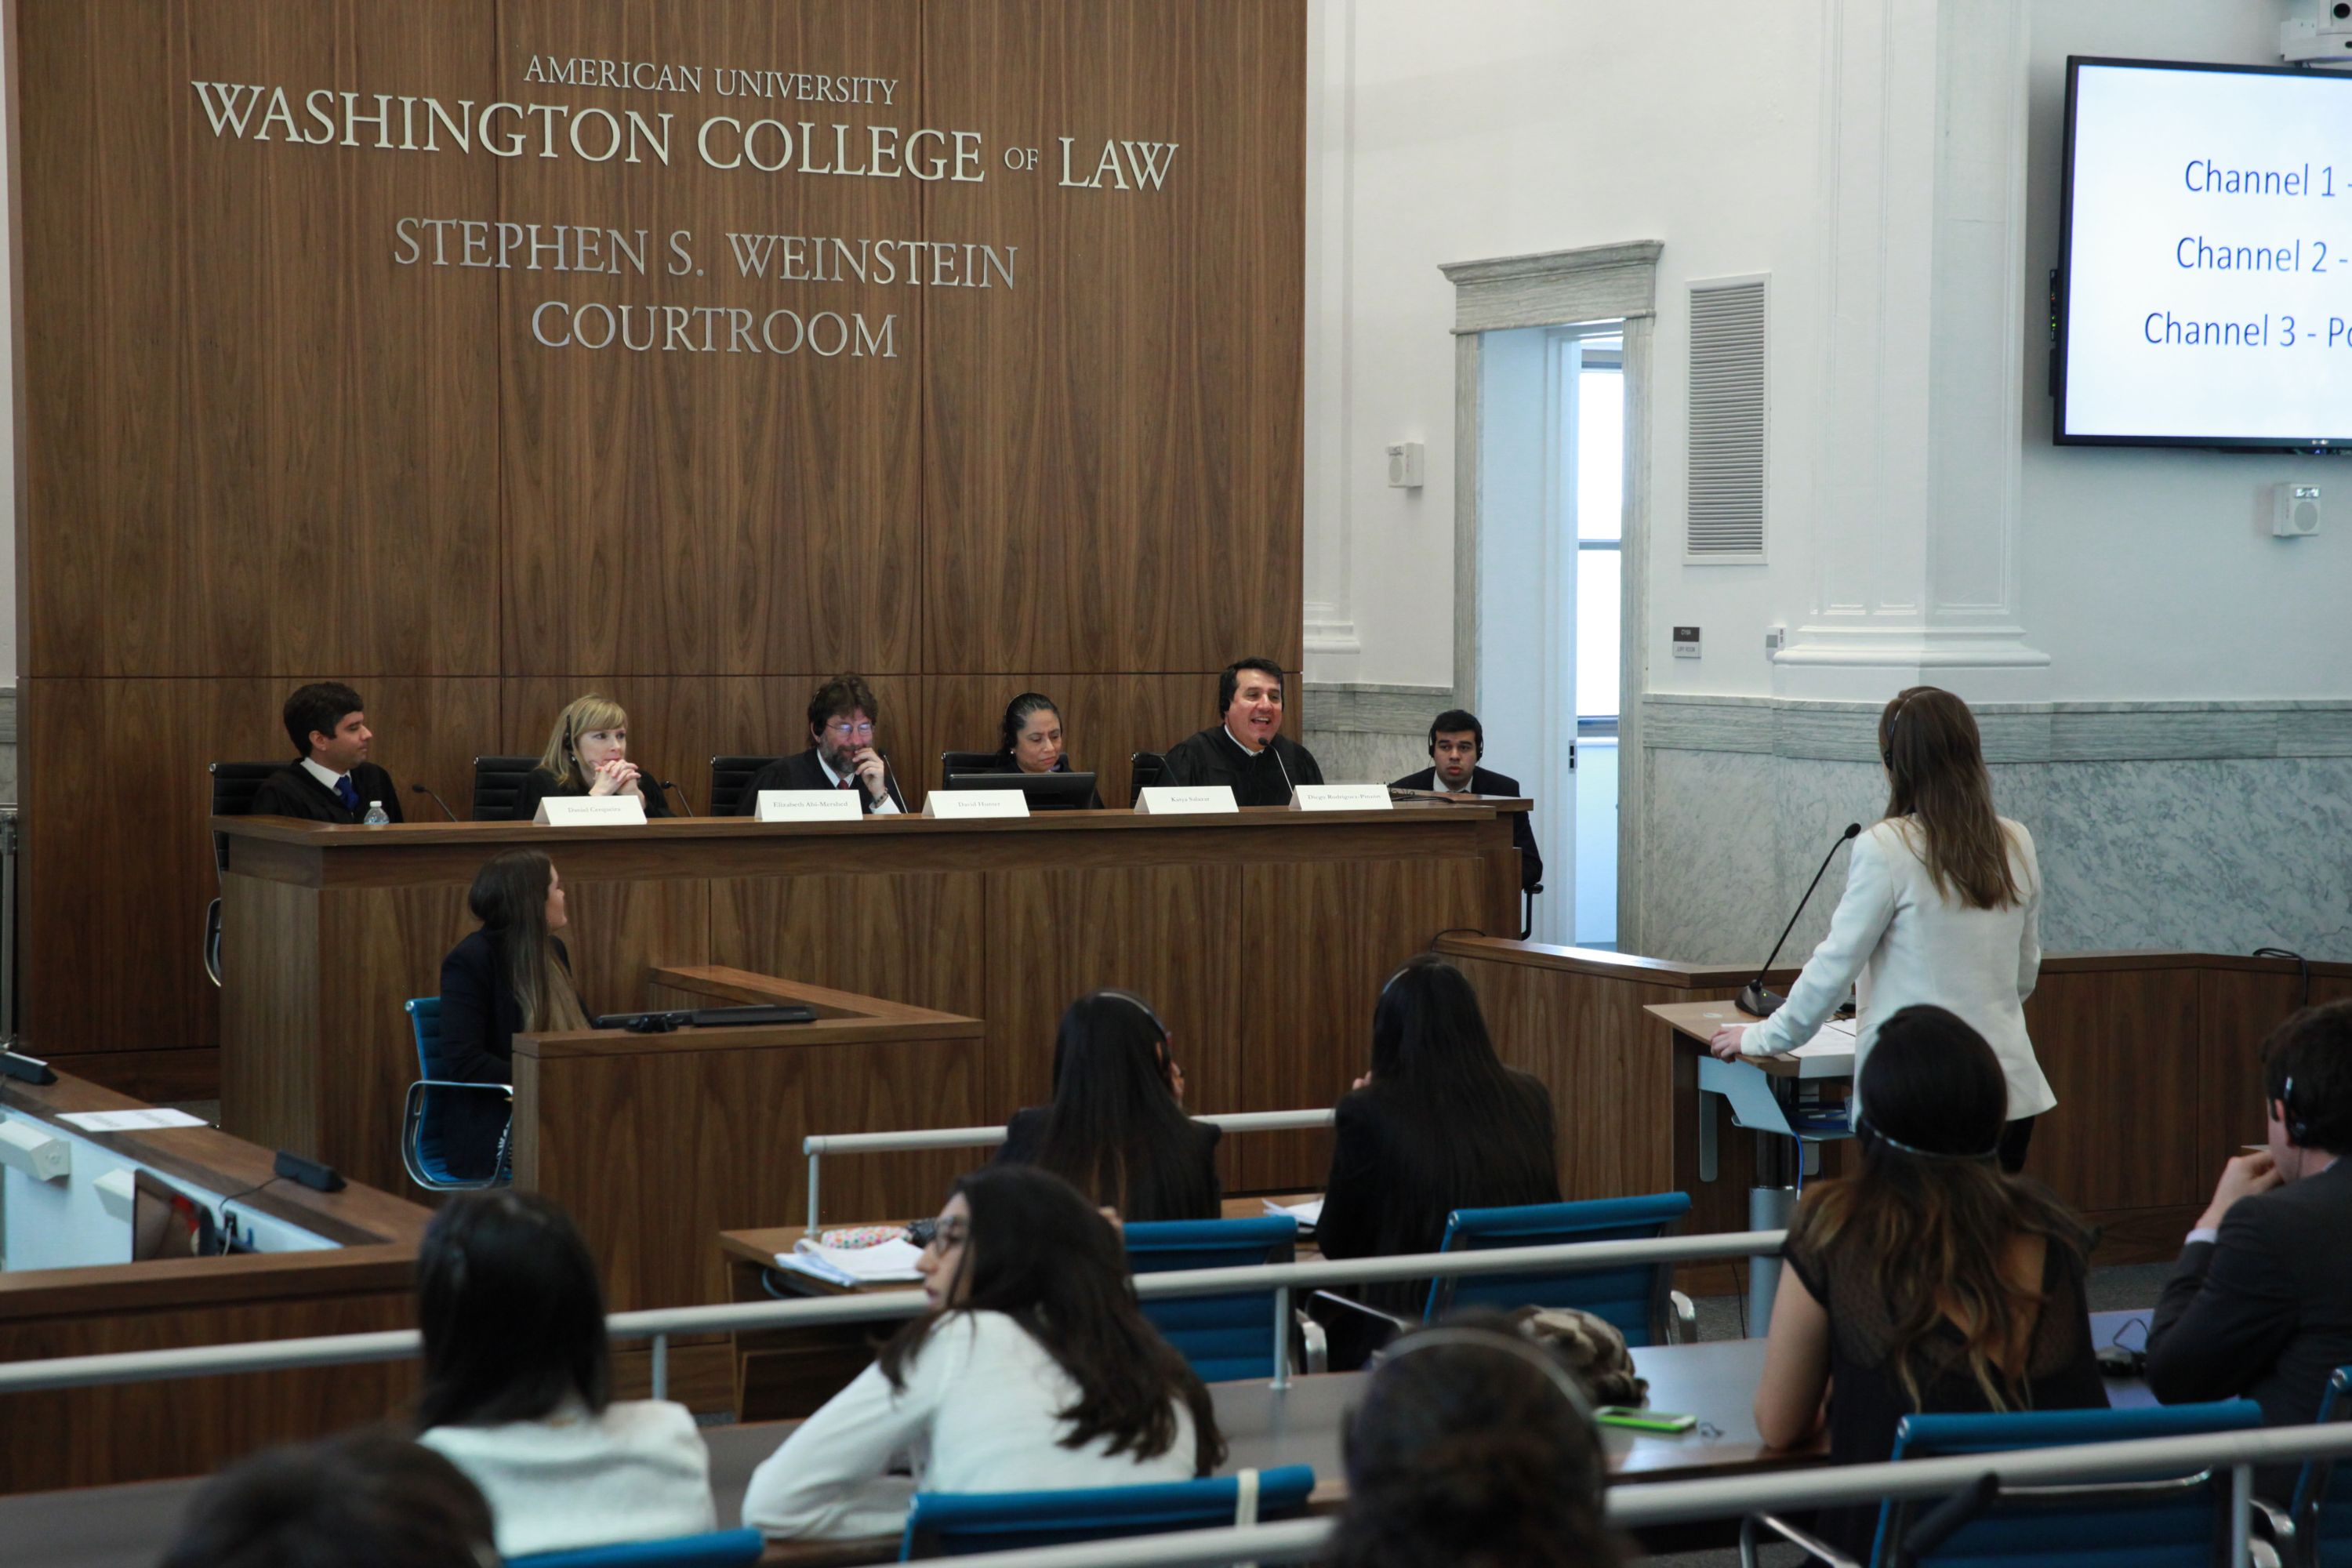 The Inter-American Human Rights Moot Court Competition at AUWCL.